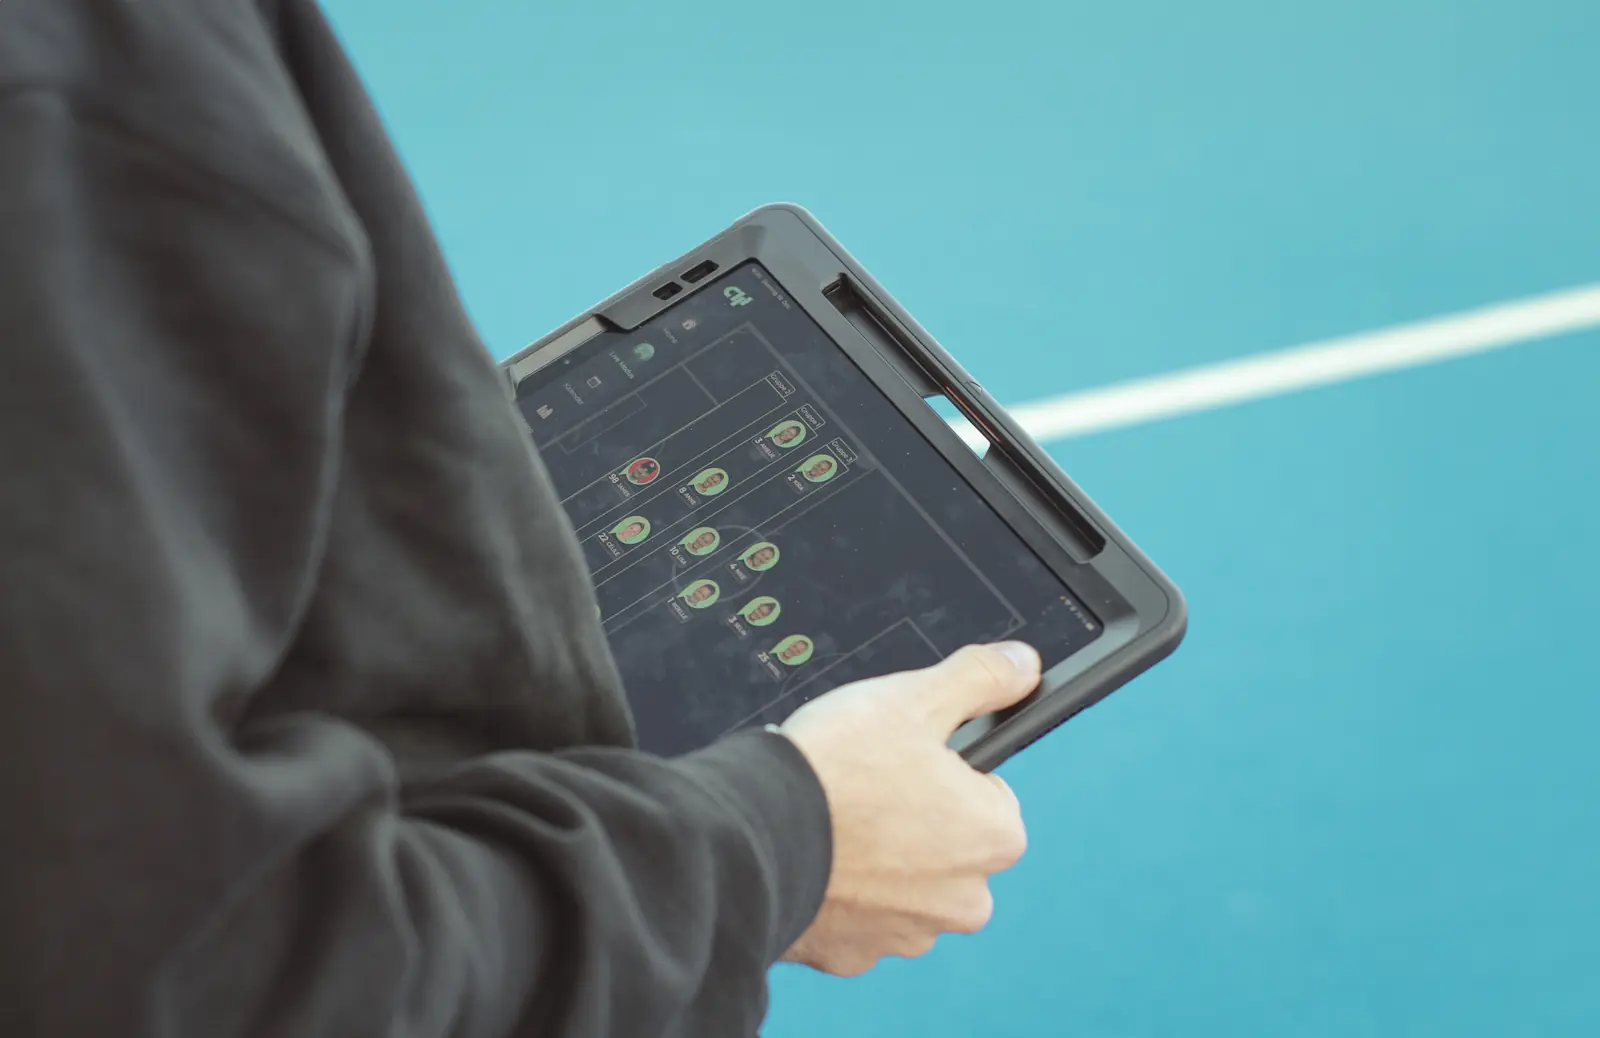 Coach holding an iPad with the Coach App from Coachwhisperer in their hands